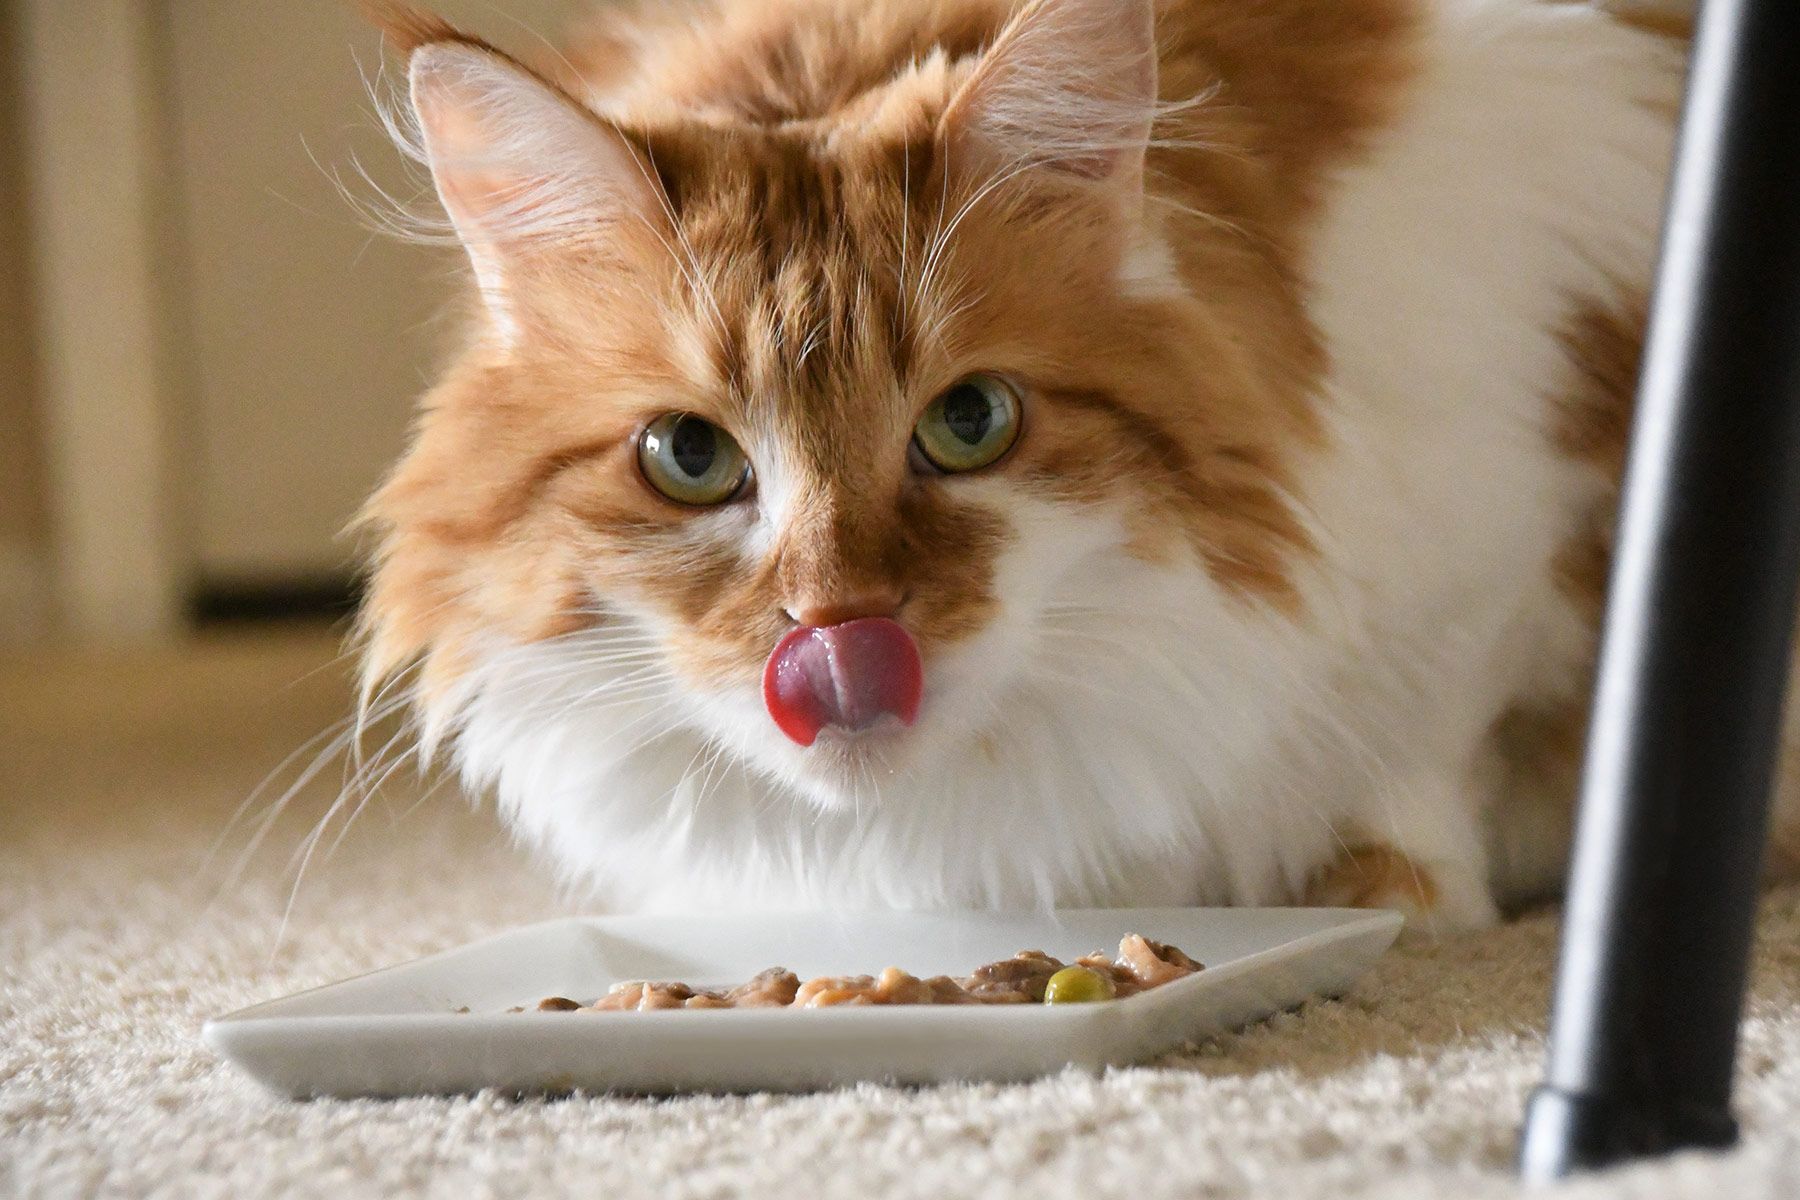 Tips for Feeding Your Cat